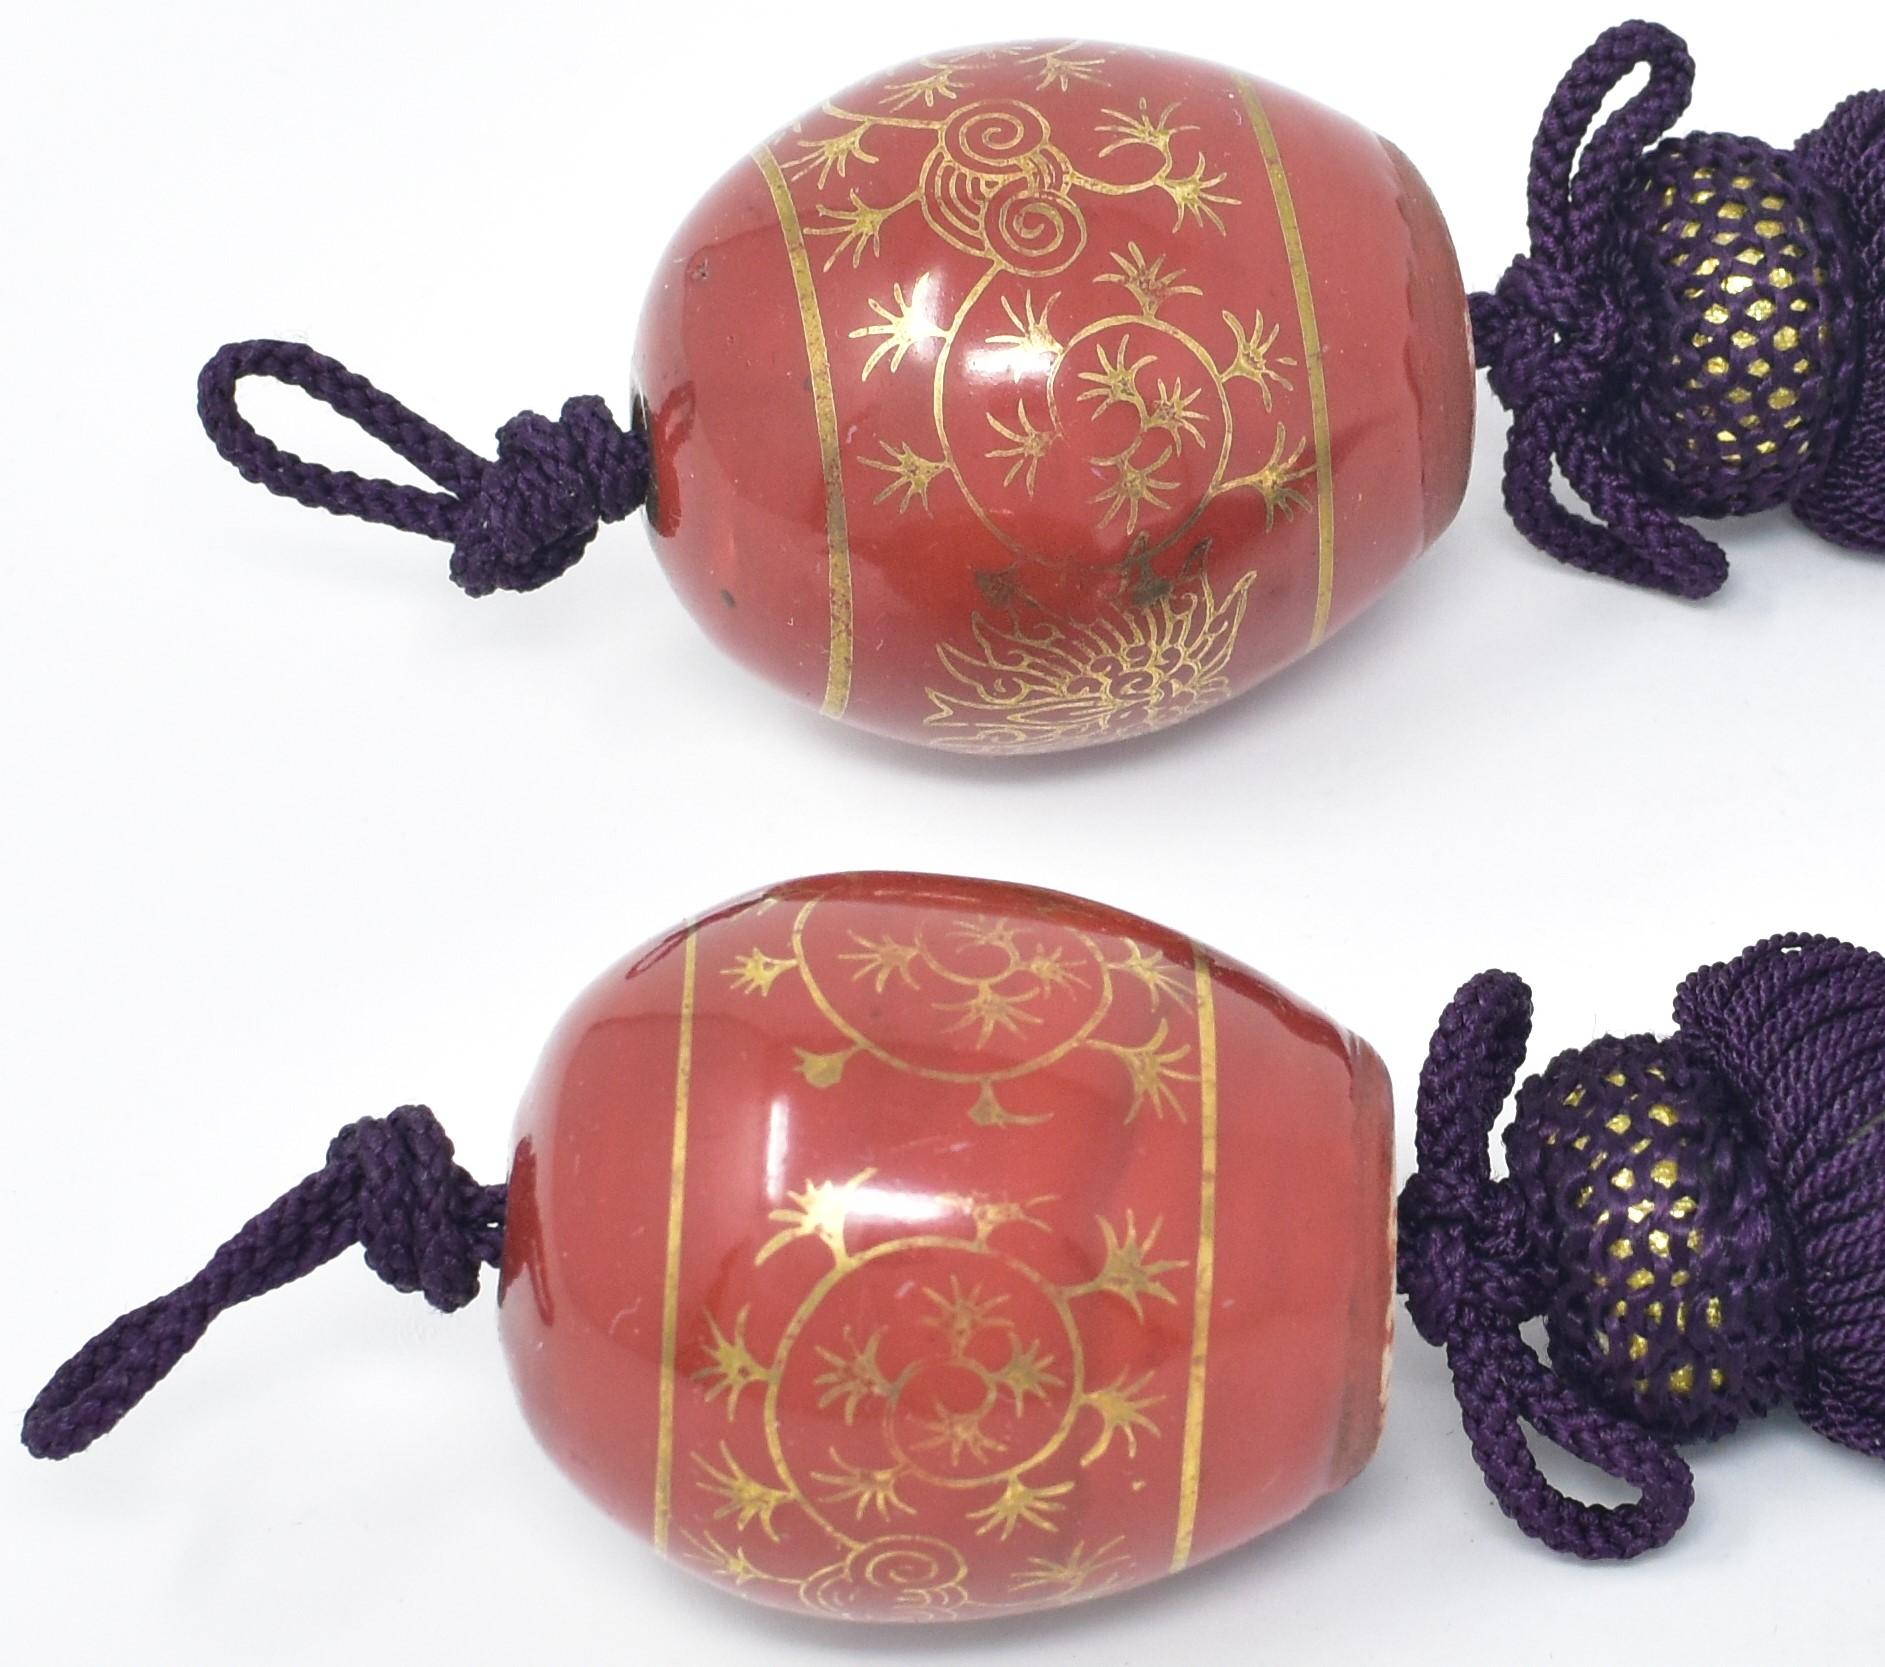 Pair of vintage porcelain scroll weights (fuchin) in orange from the Kutani region of Japan.
Dating from the prewar Showa period of circa 1960, these egg-shaped scroll weights are gilded and hand-painted. Each piece bears the mark of Kutani on the